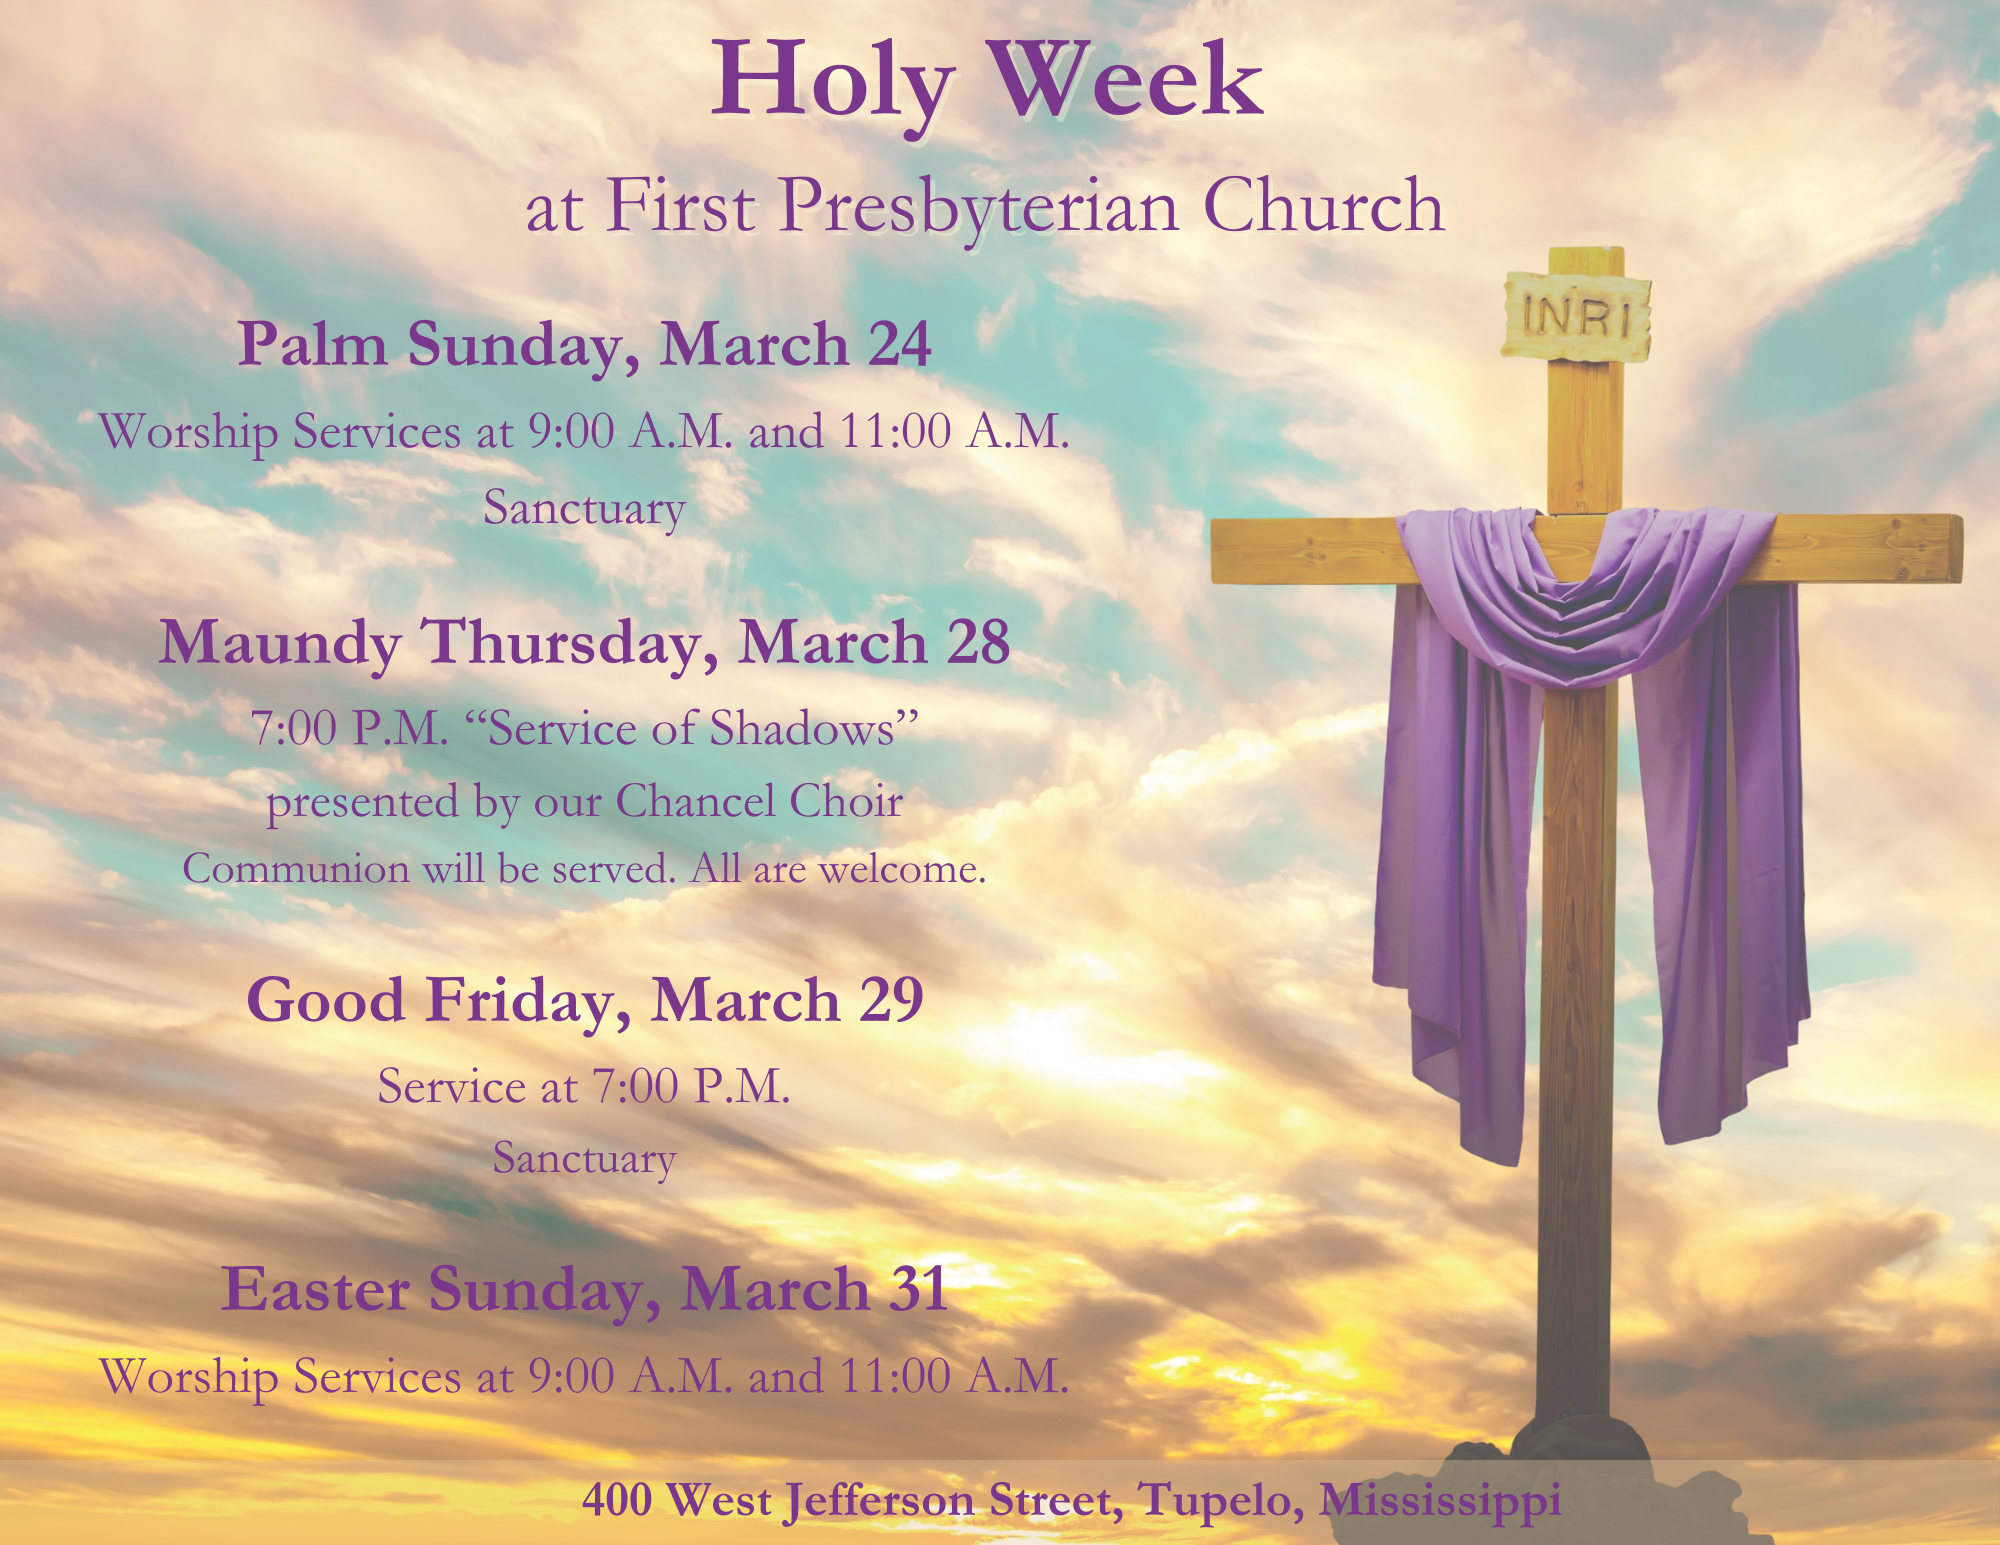 · Palm Sunday, March 24—two services. · Maundy Thursday, March 28 700 p.m.—Chancel Choir’s Service of Shadows with Communion served. · Good Friday, March 29 Service at 700 p.m. · Easter Sunday, Ma